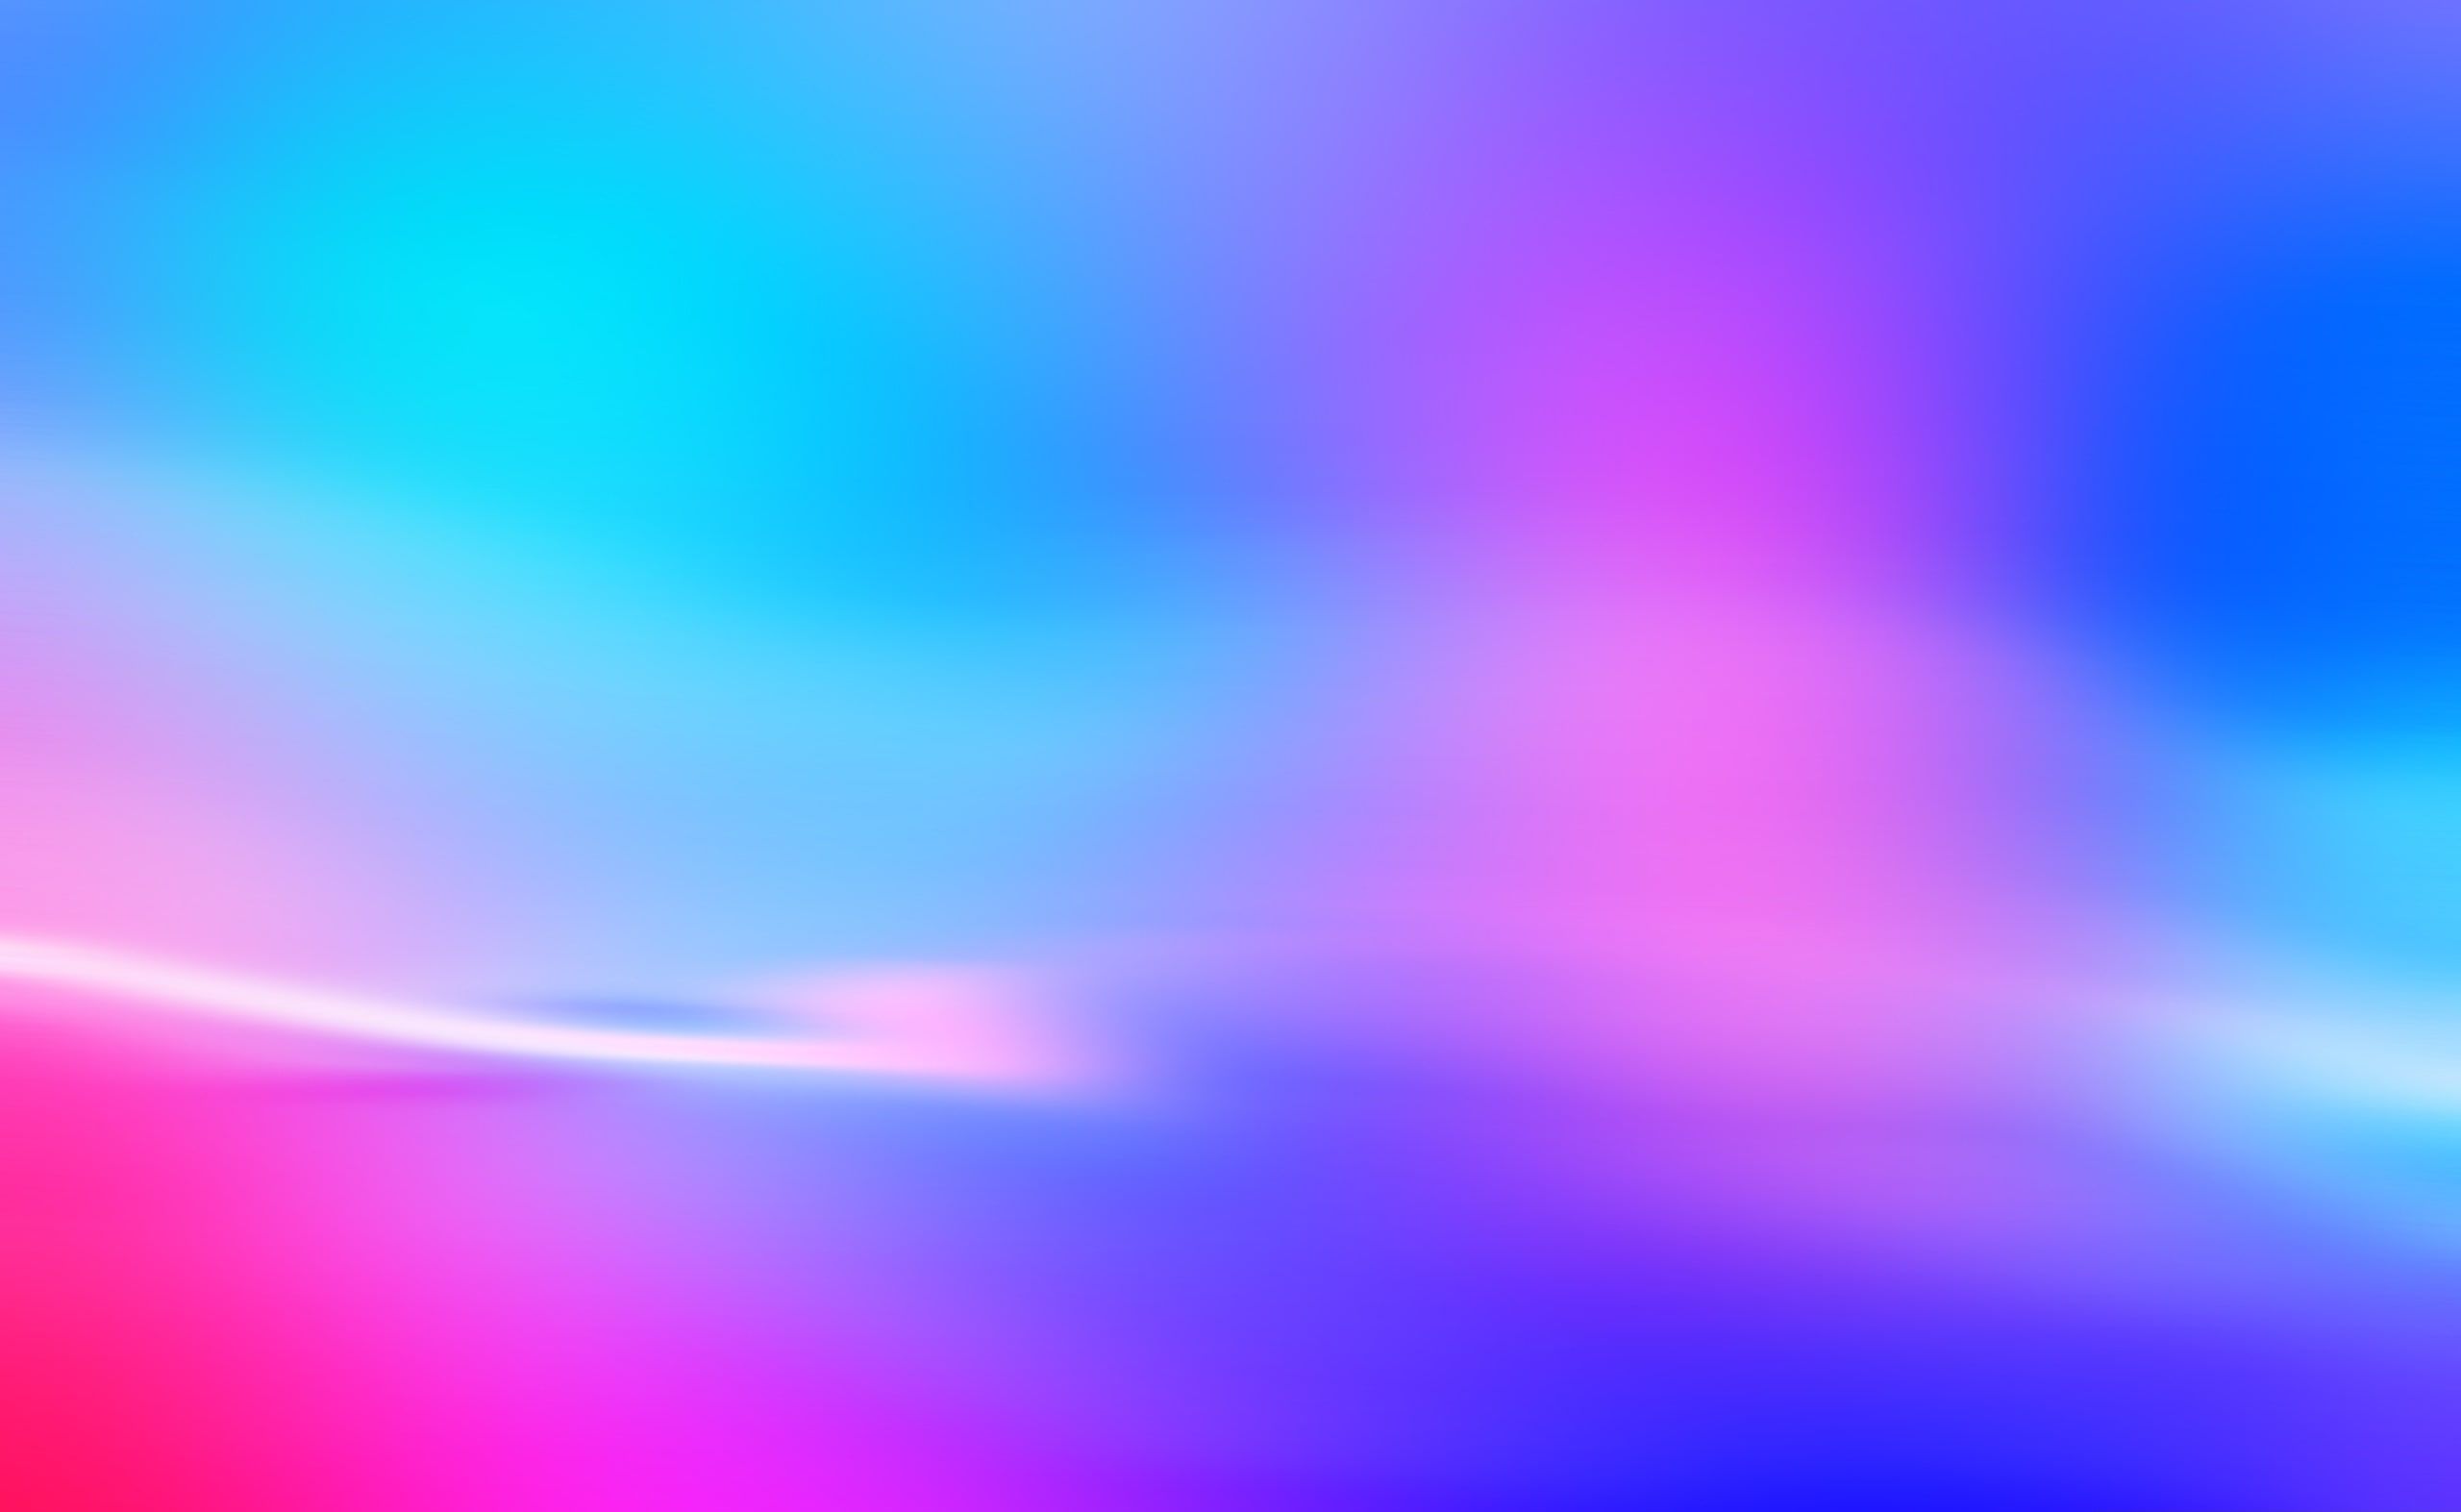 A colorful abstract background with blurred lines - Cyan